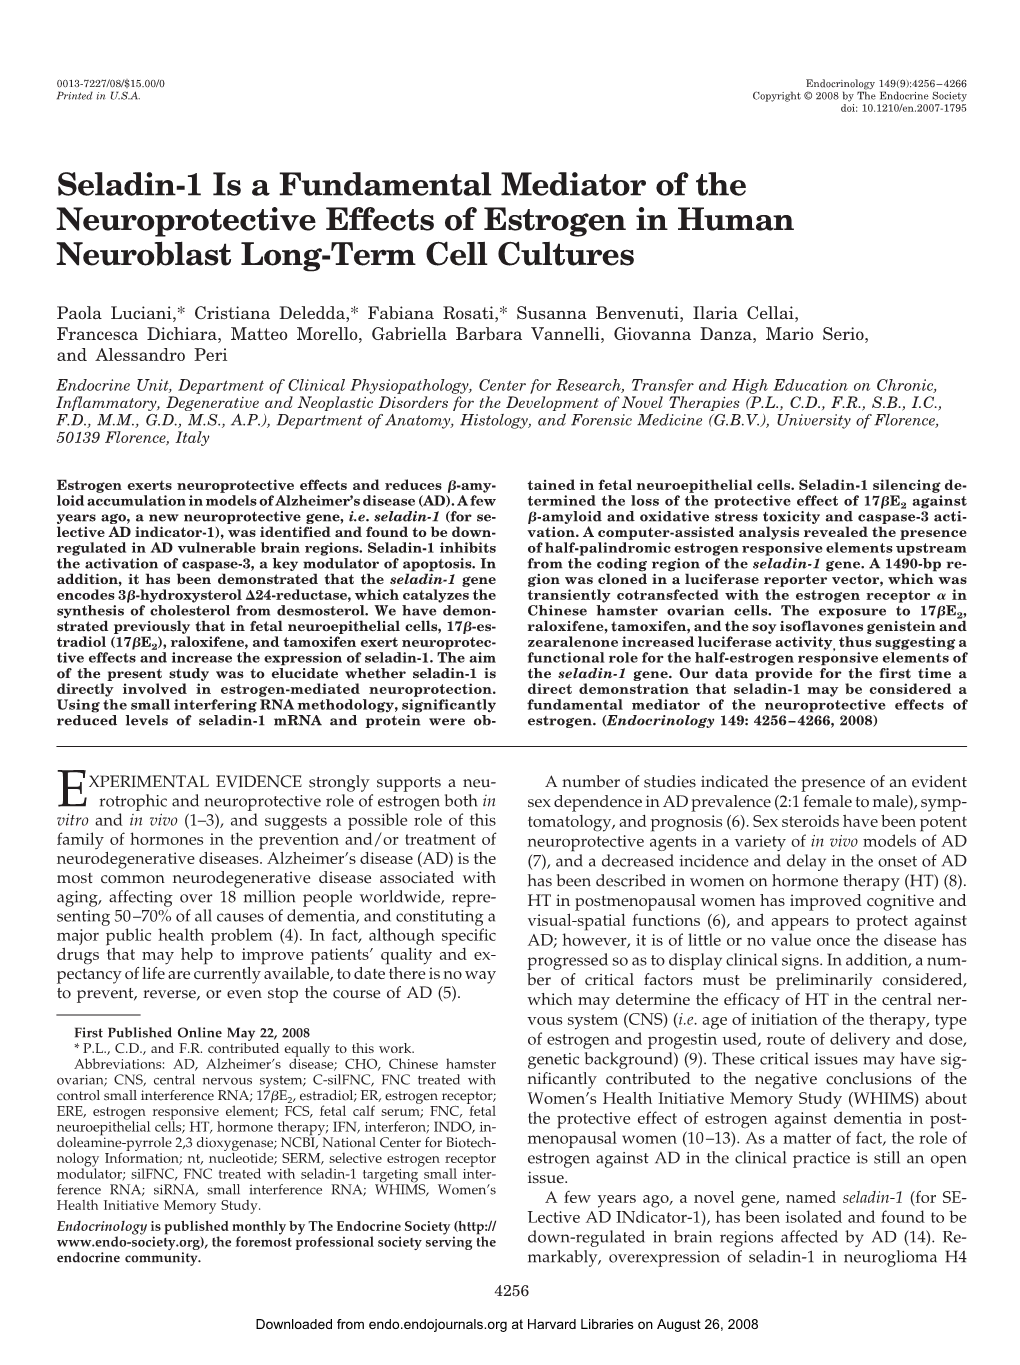 Seladin-1 Is a Fundamental Mediator of the Neuroprotective Effects of Estrogen in Human Neuroblast Long-Term Cell Cultures